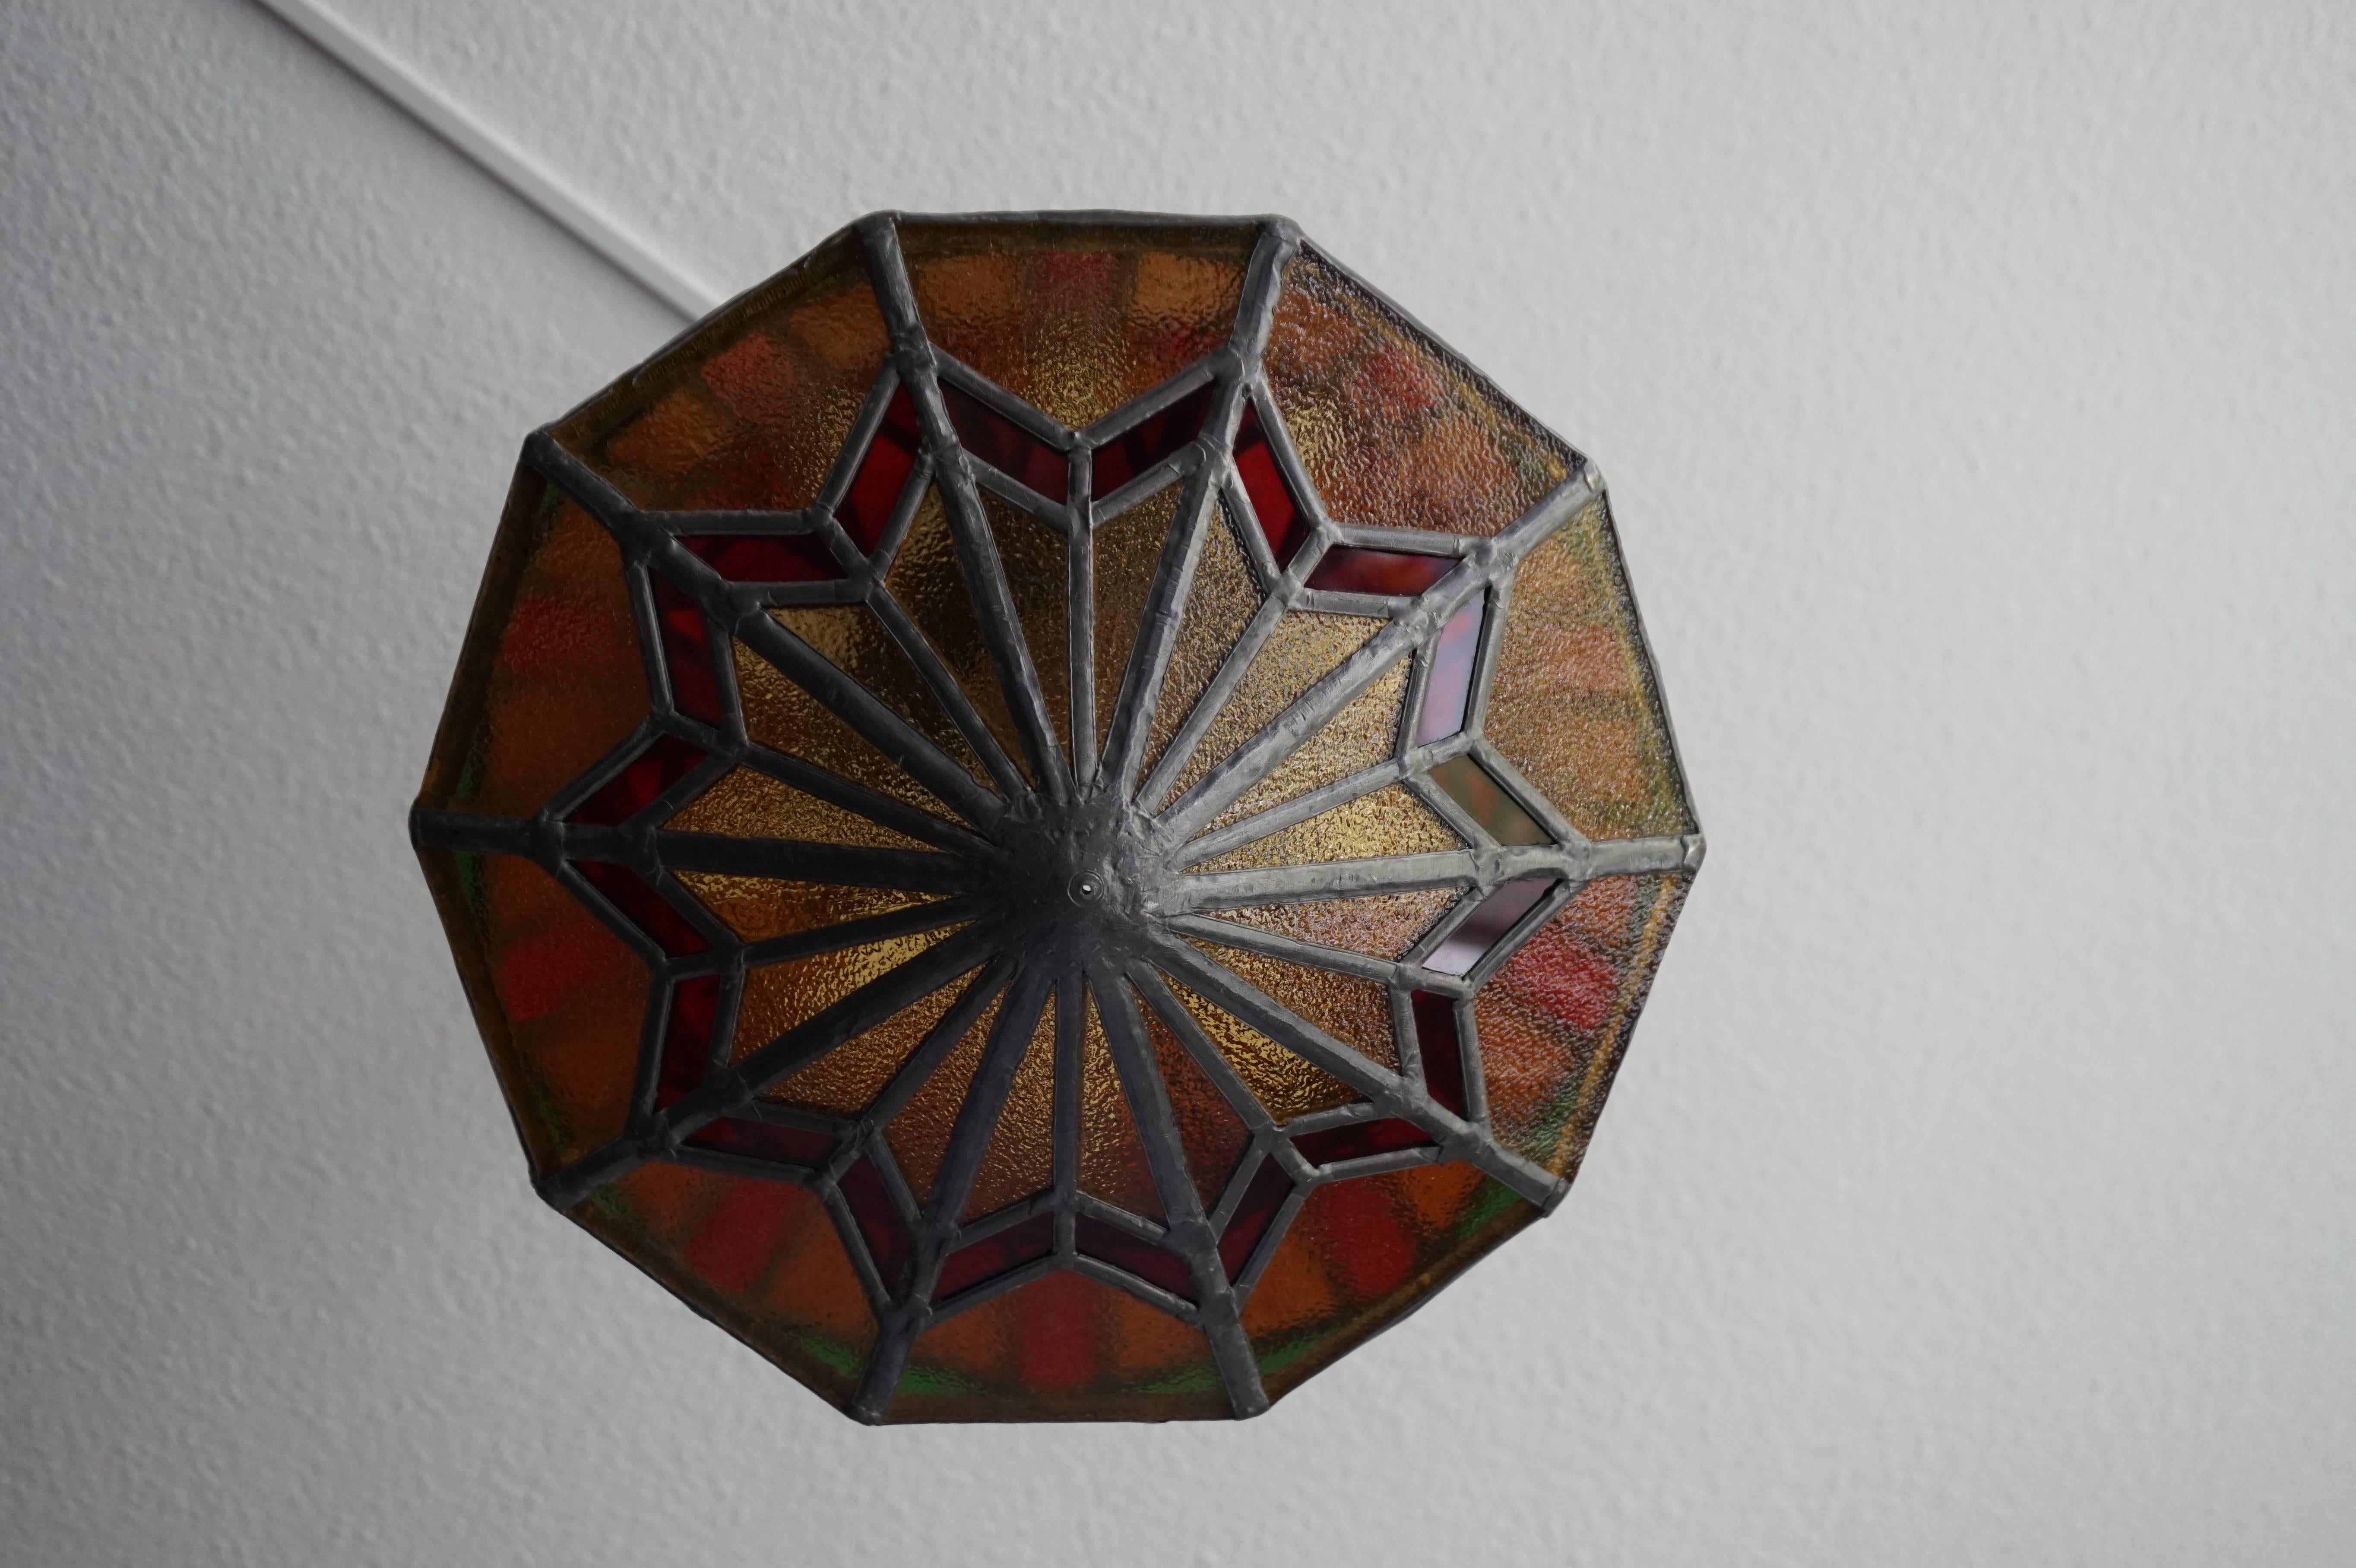 Hand-Crafted Handcrafted Stain Leaded Art Deco Glass Pendant Geometric Design & Great Colors